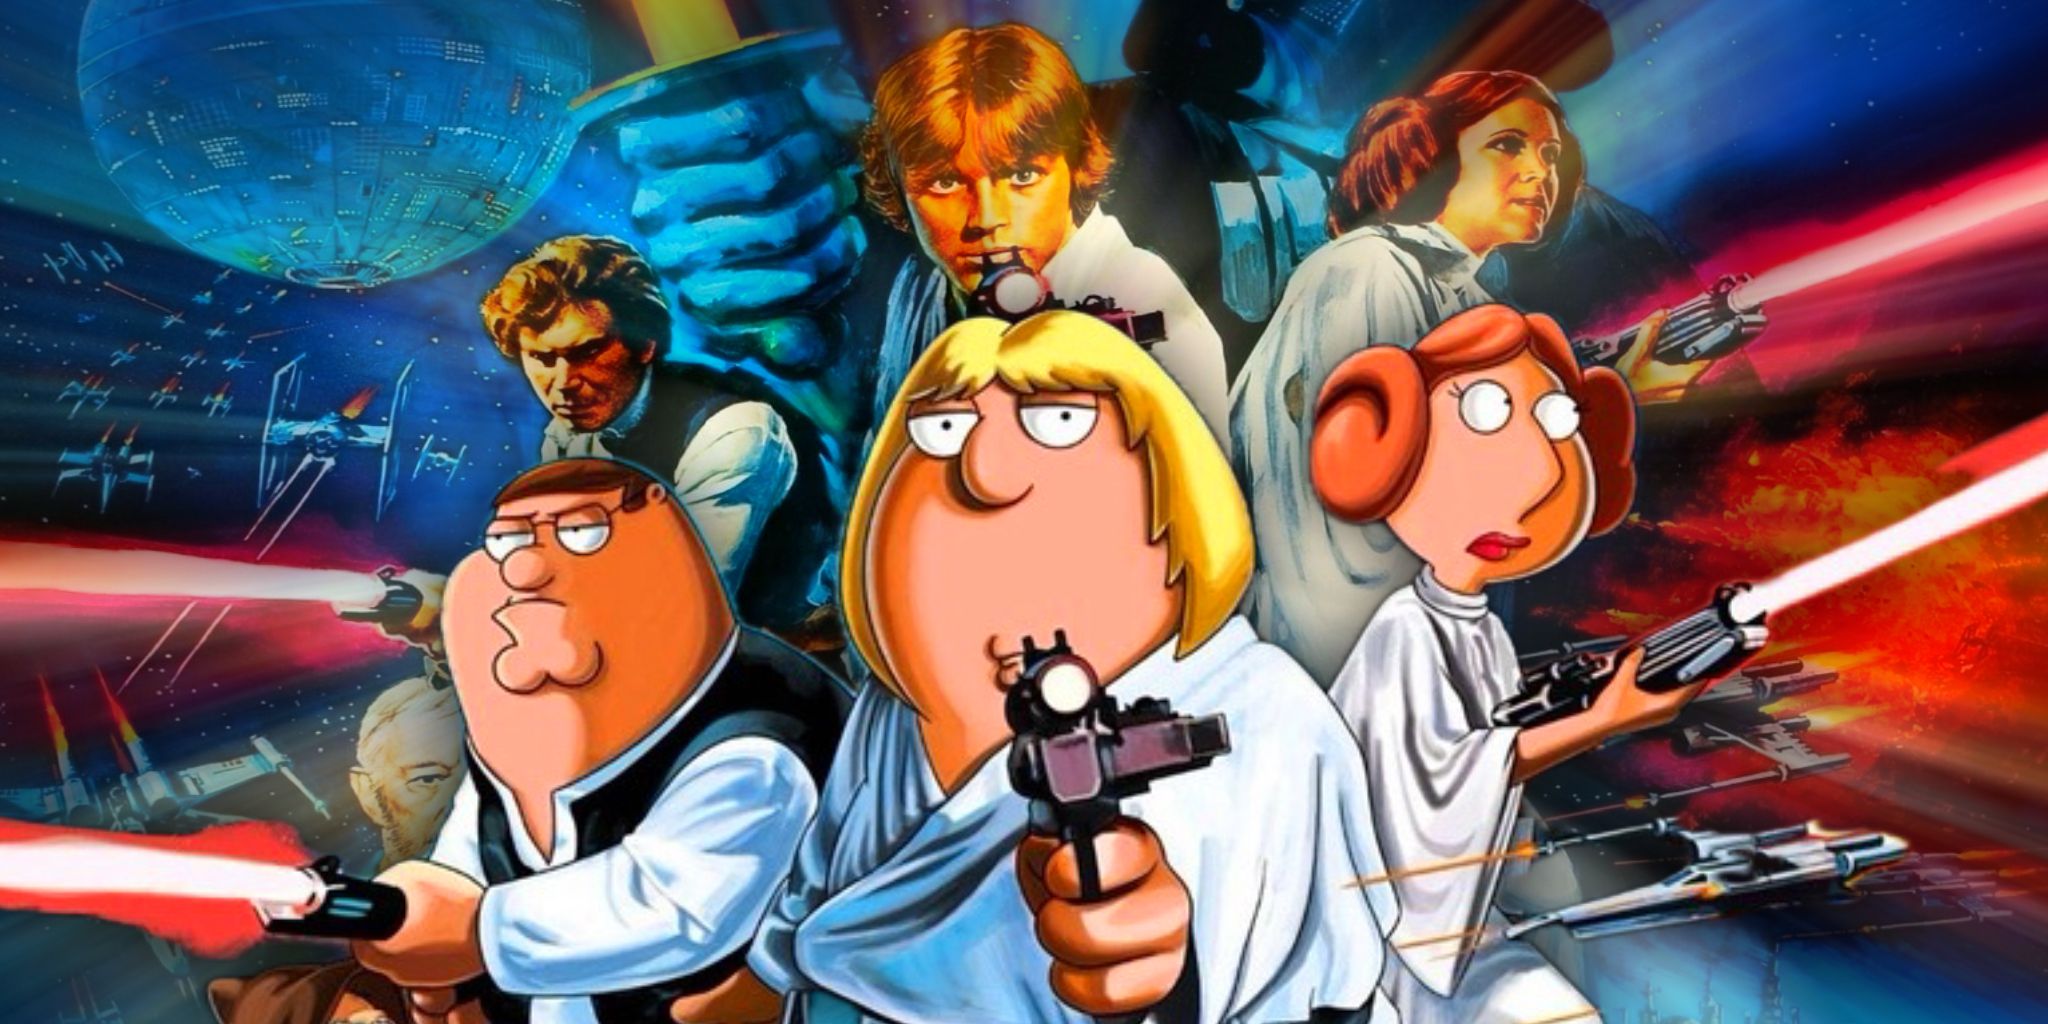 The posters for Star Wars and Family Guy's Blue Harvest parody